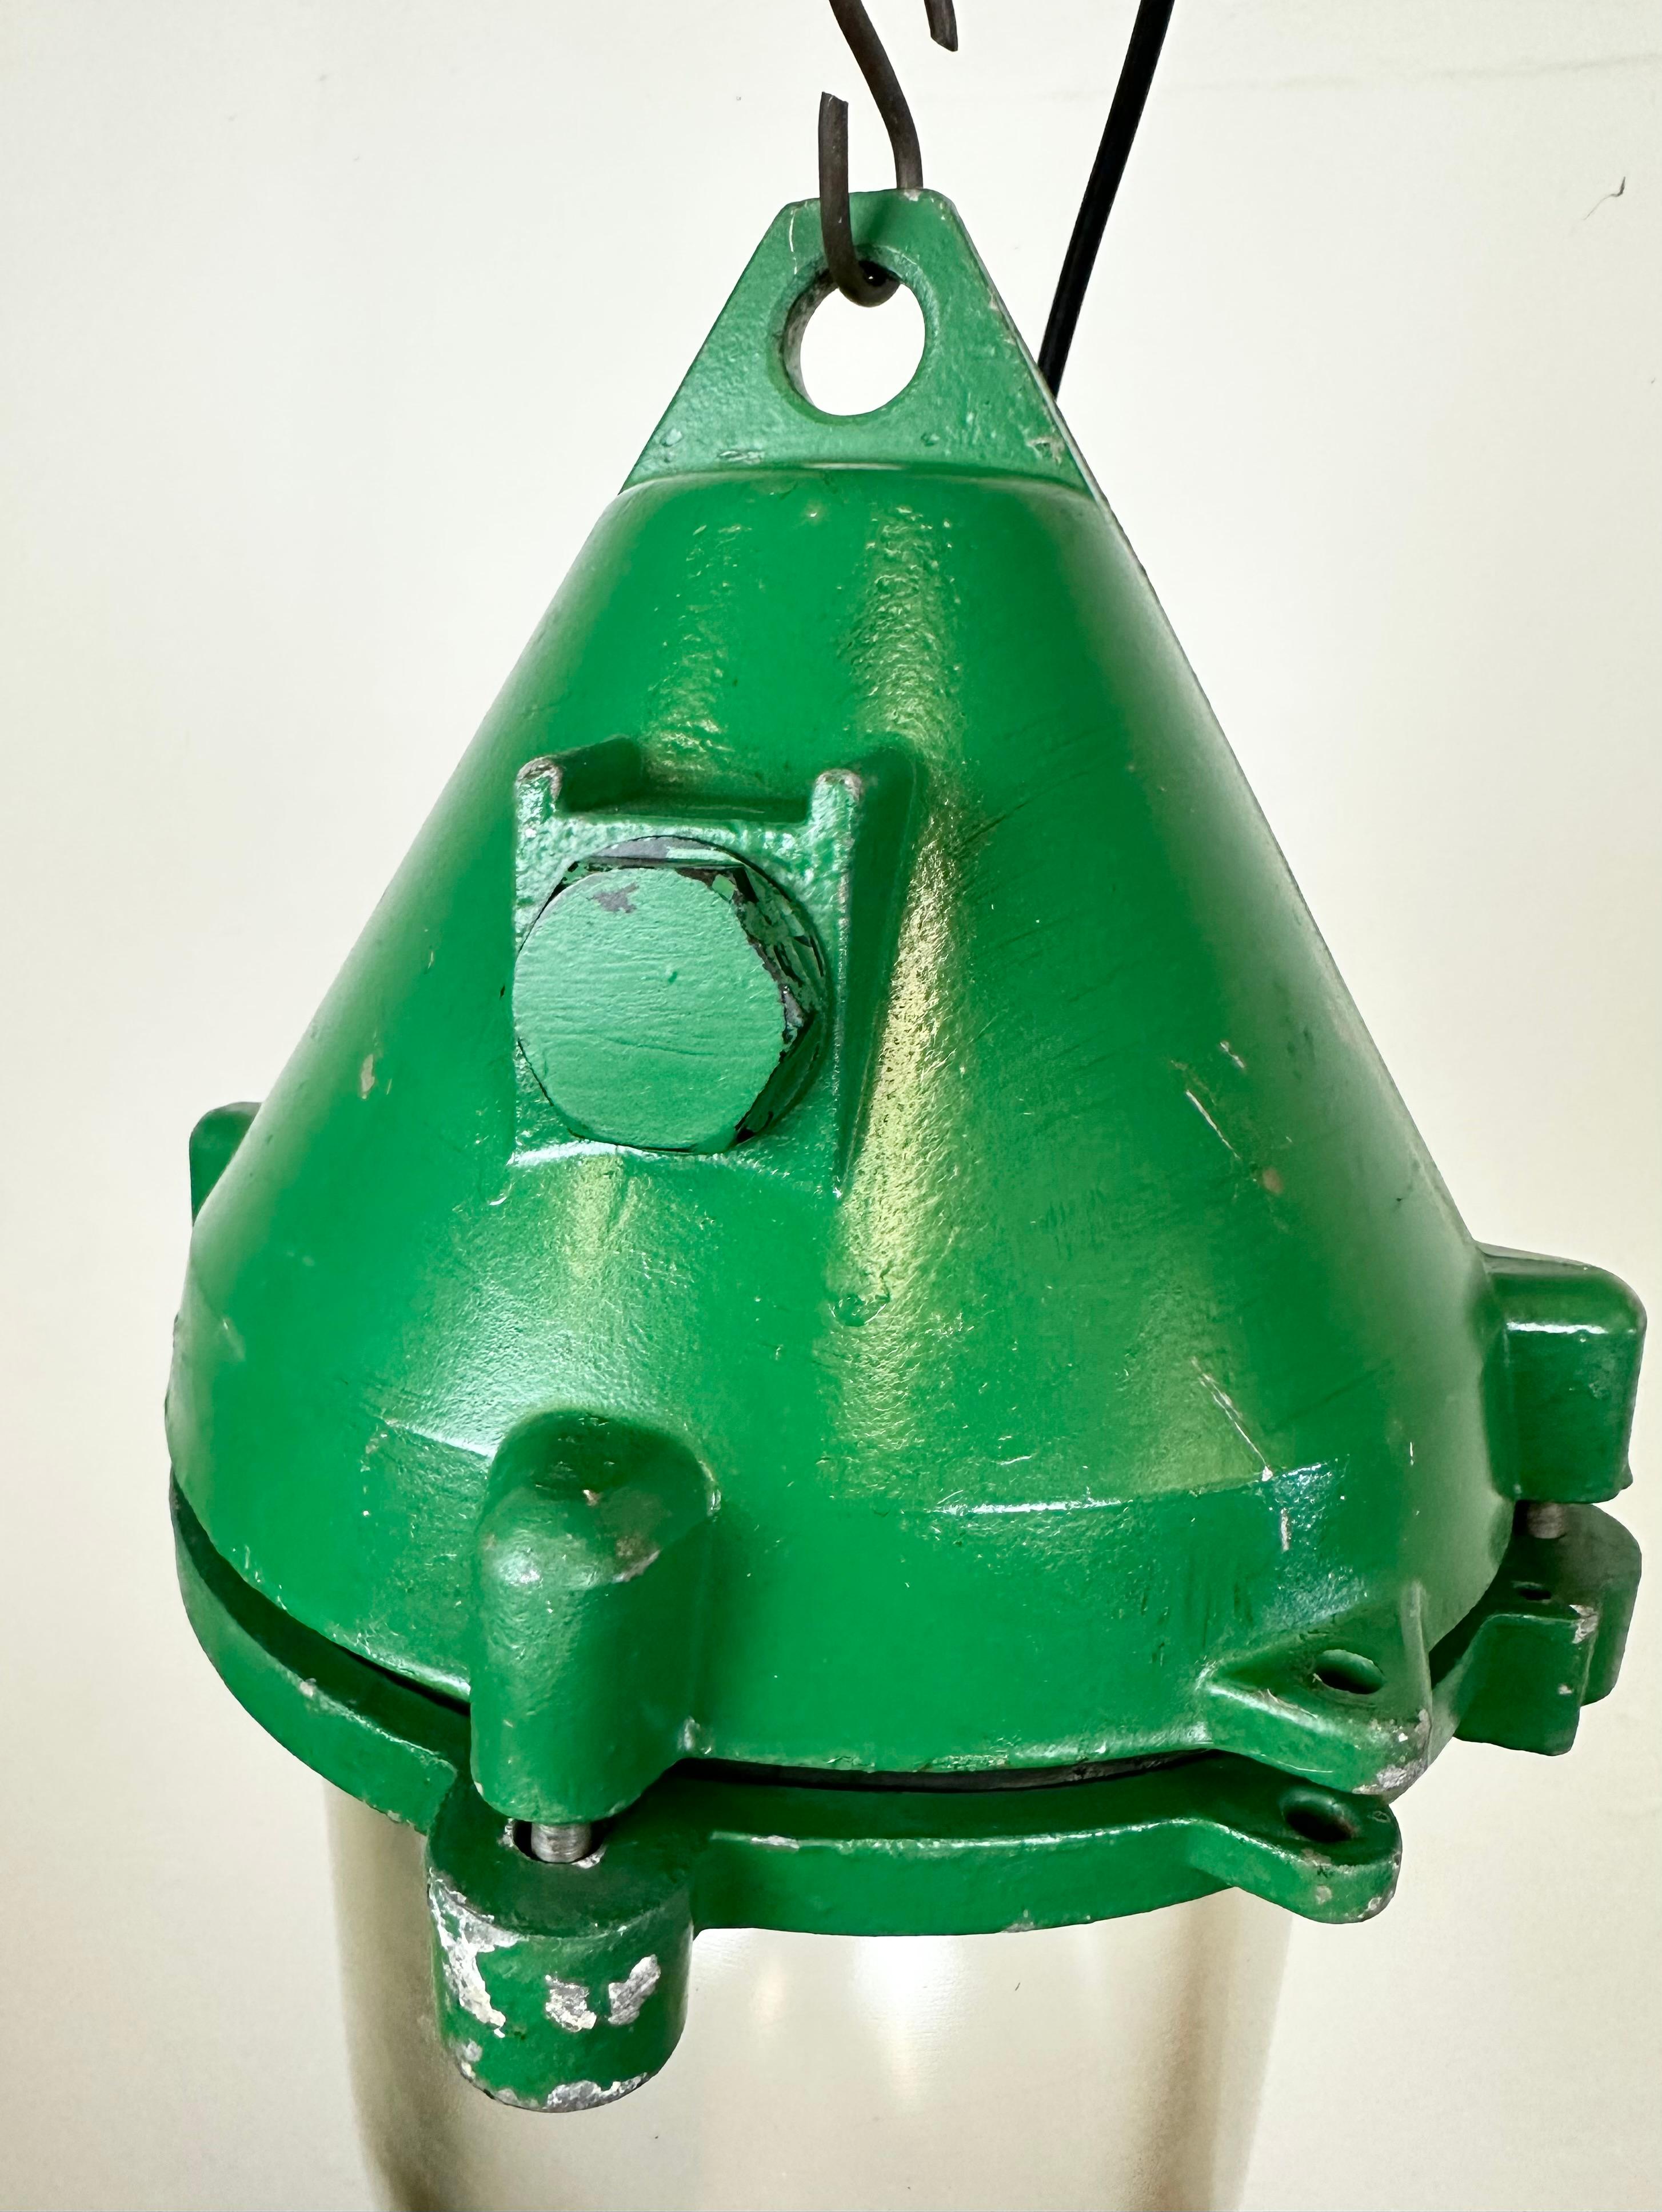 Green Industrial Cast Aluminium Explosion Proof Lamp, 1970s For Sale 5